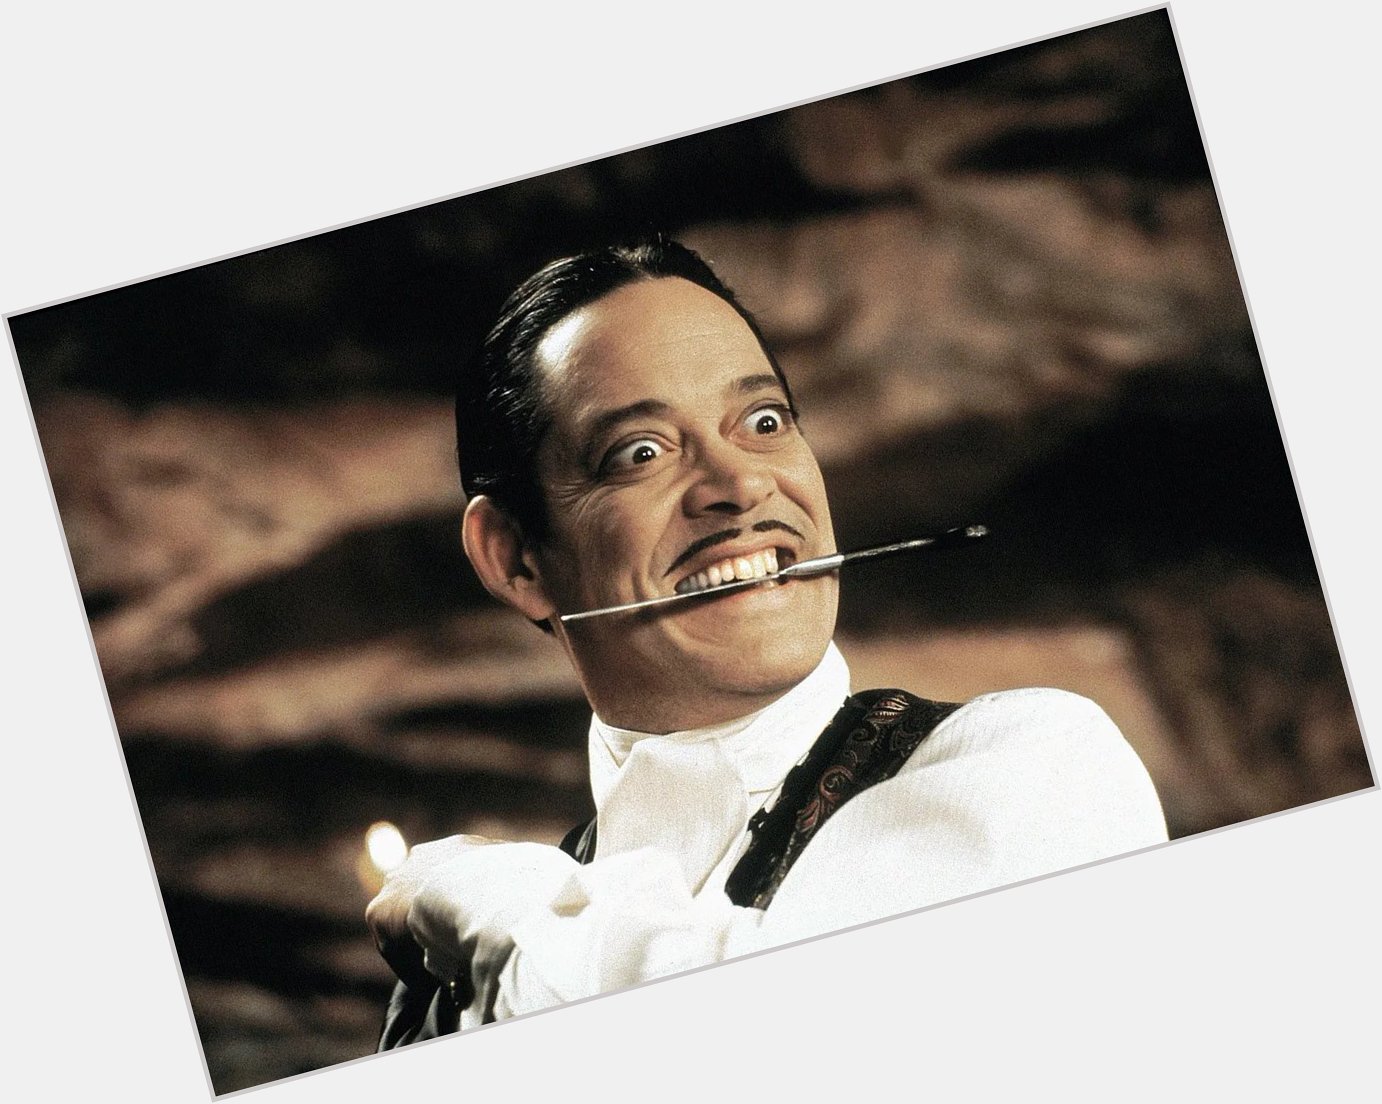 Happy Birthday to the late RAUL JULIA, born in 1940. Our most beloved Gomez  